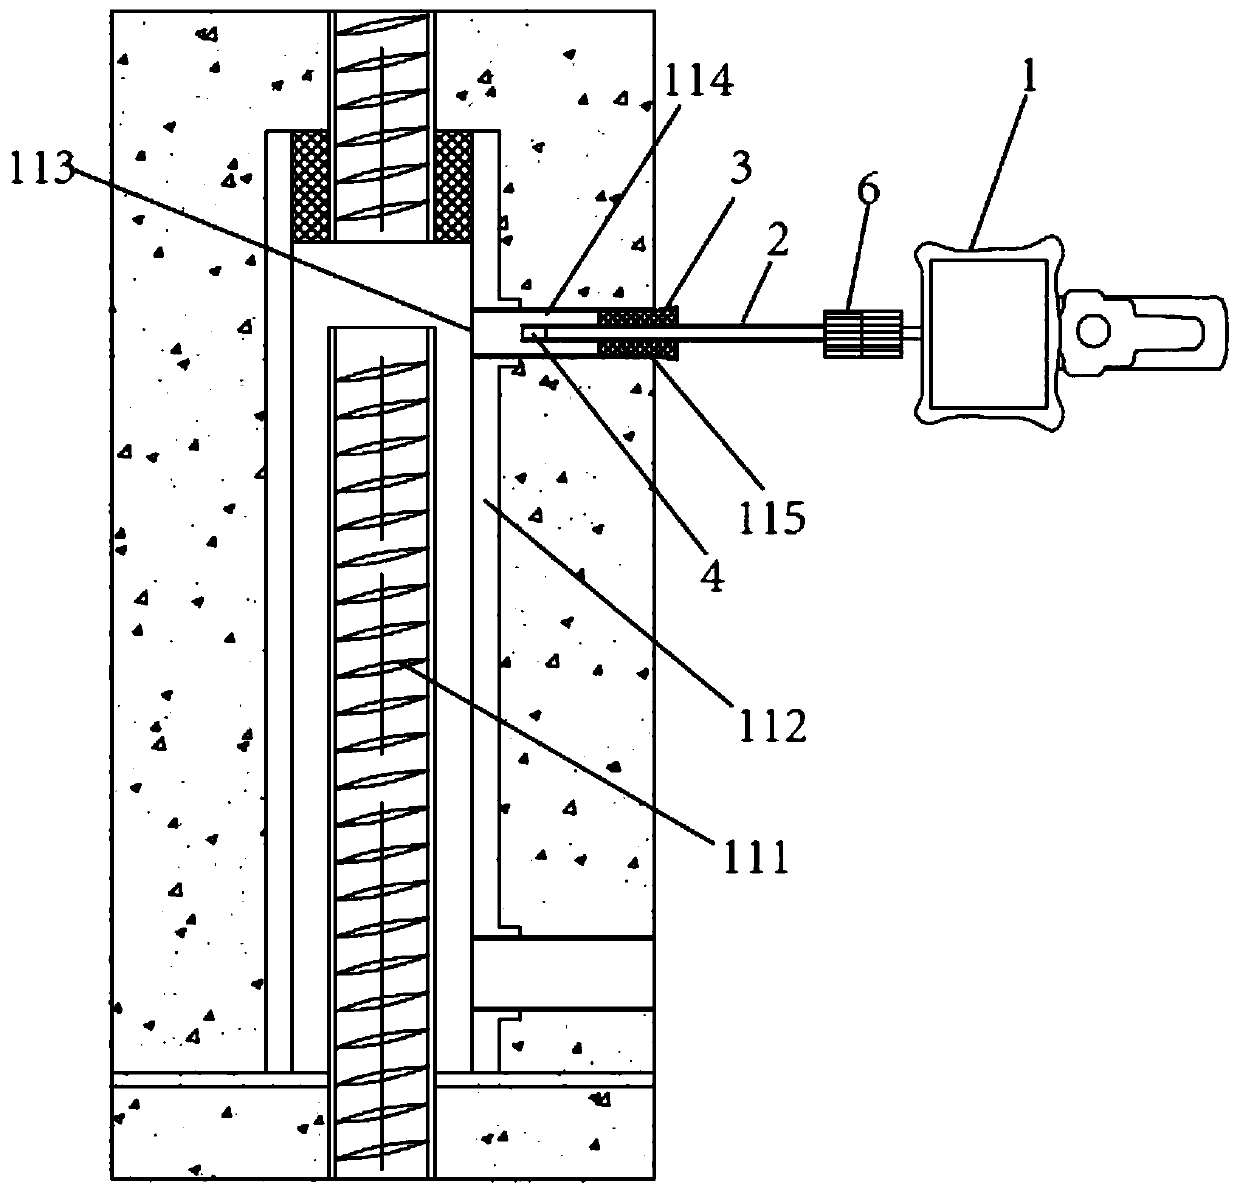 A method for detecting the insertion depth of connecting steel bars in half-grouting sleeve steel bar joints